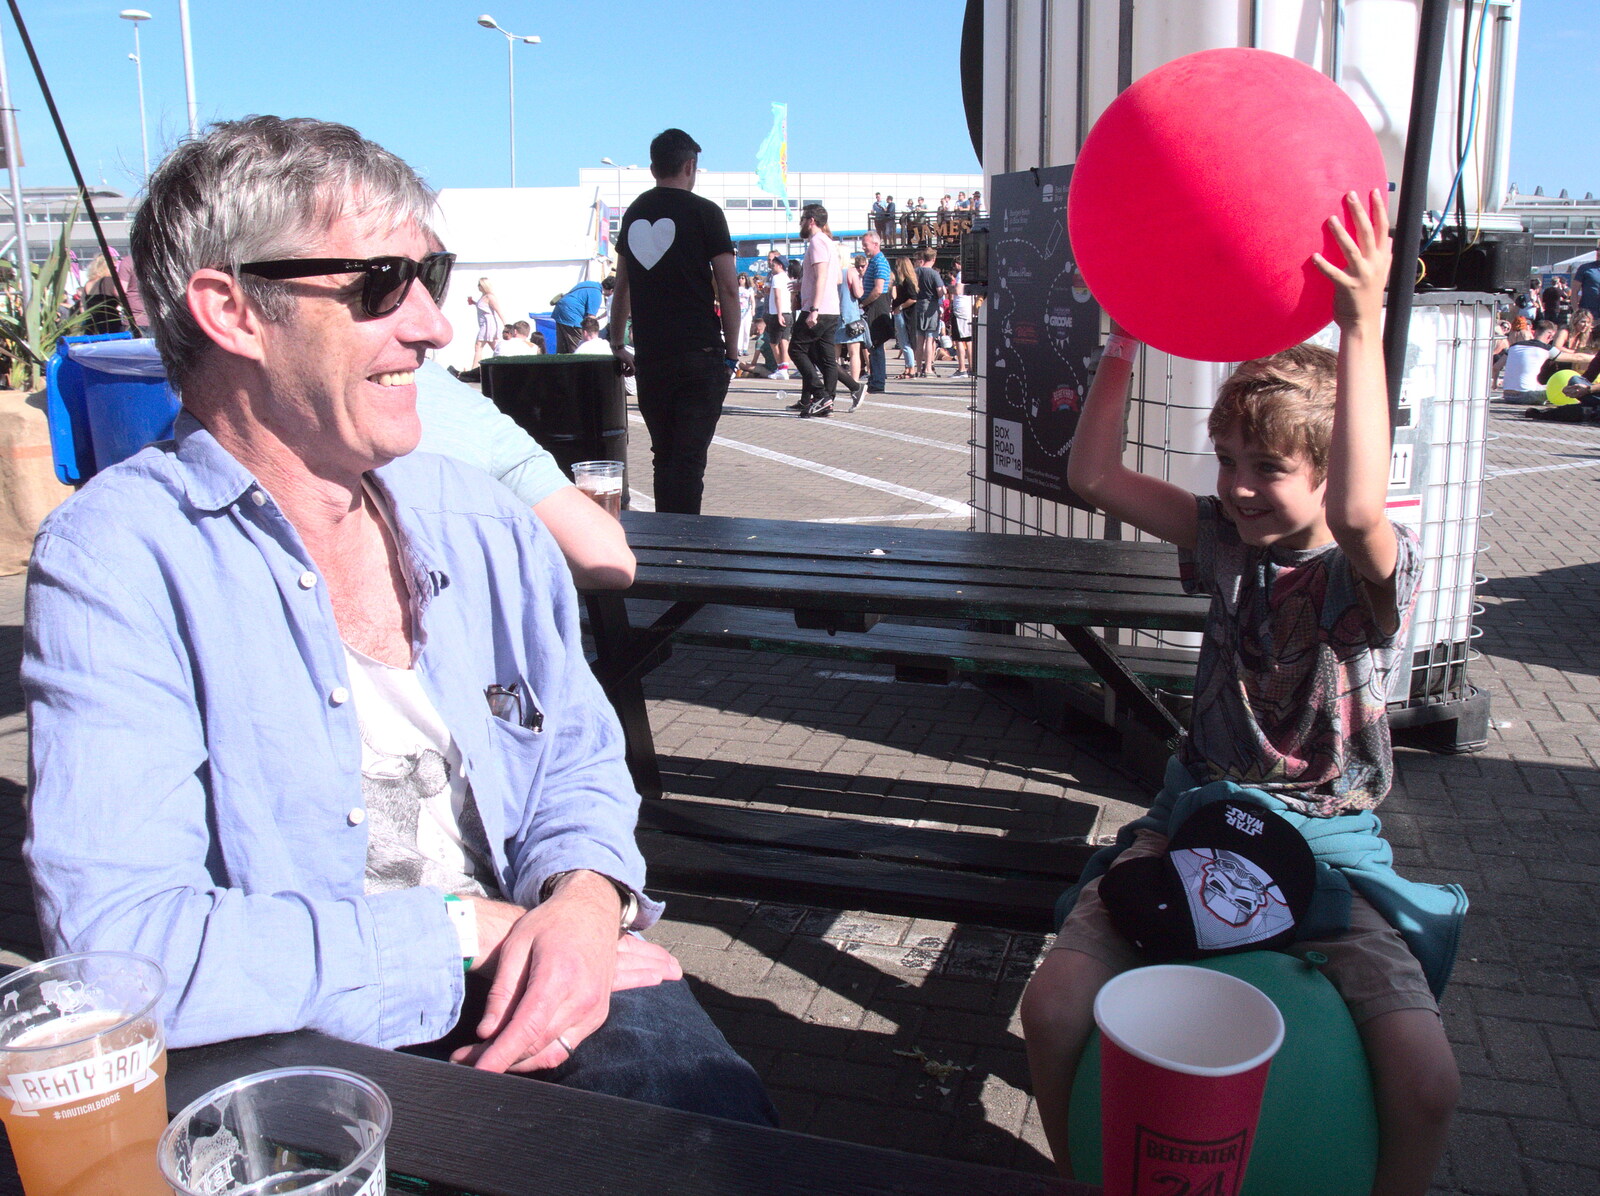 Wayne and Fred, with a balloon from Beatyard Festival, Dún Laoghaire, County Dublin, Ireland - 5th August 2018